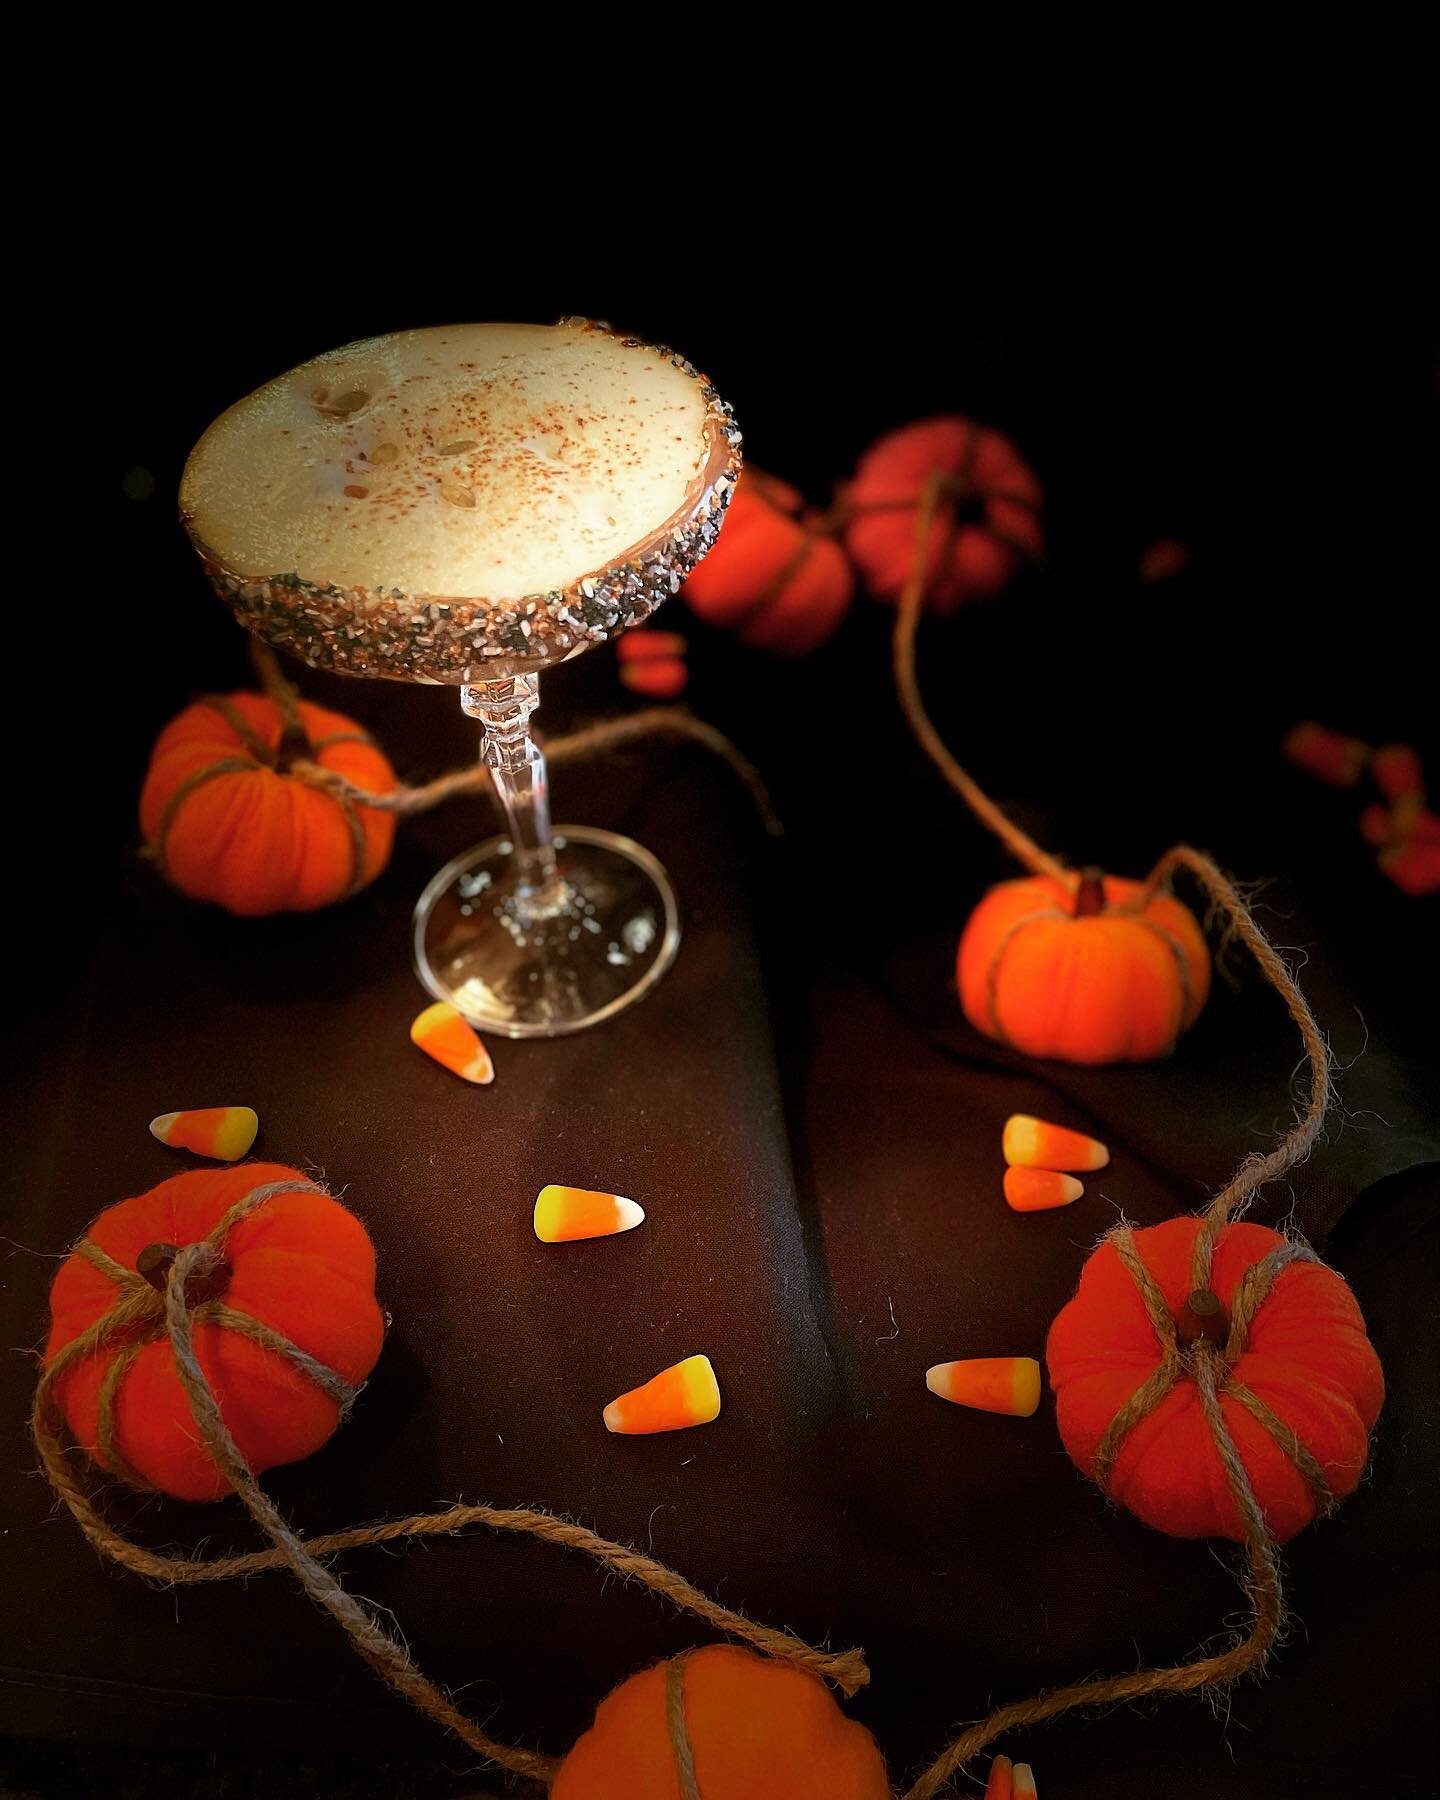 Tis the season! 🎃 Ask and you shall receive! The Pumpkin Espresso Martini is back for a limited time. 🍁Come on down and try one for dessert!